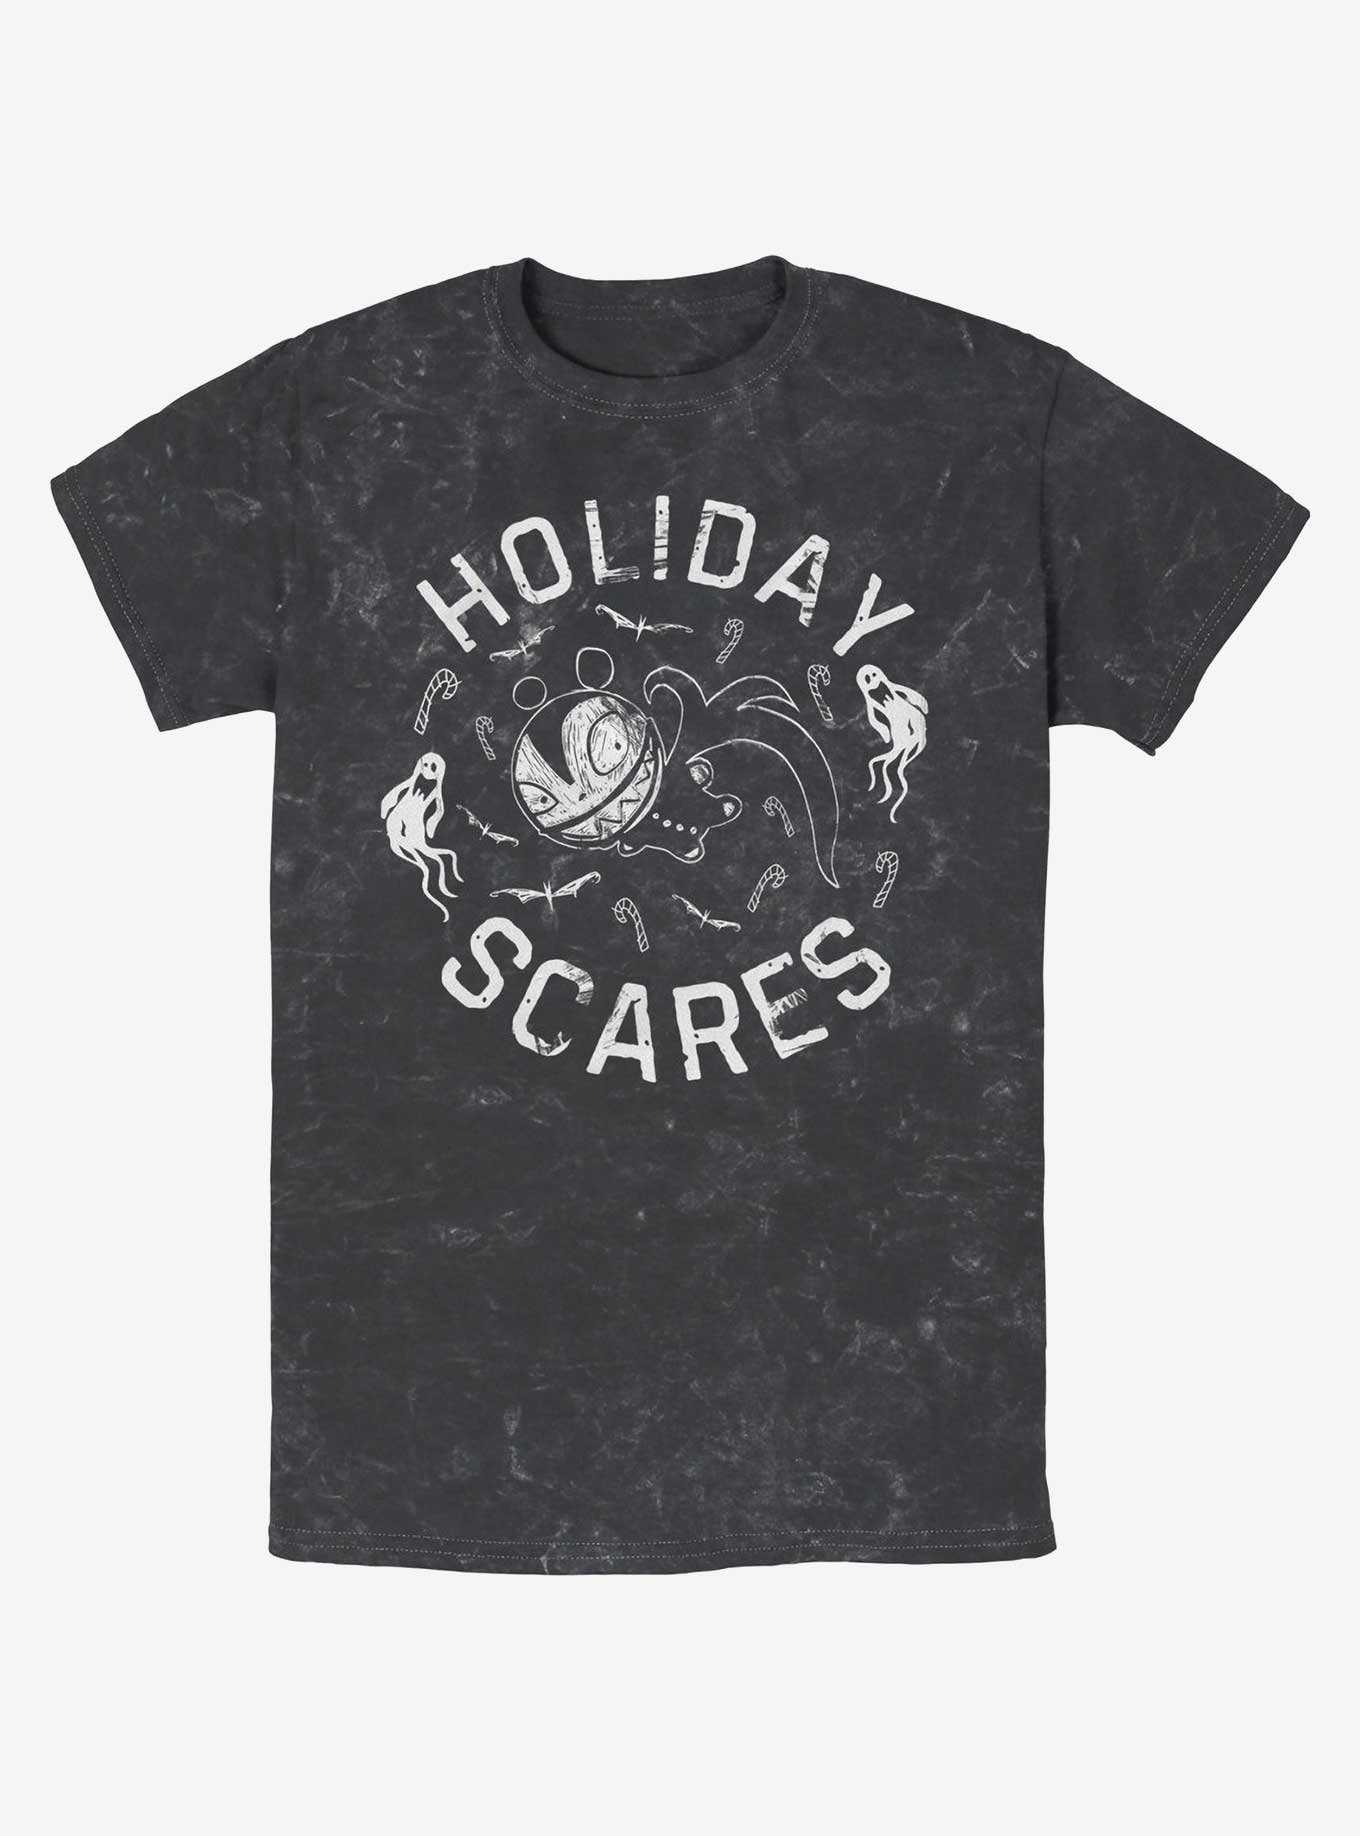 Disney The Nightmare Before Christmas Holiday Scares Vampire Teddy Mineral Wash T-Shirt, , hi-res